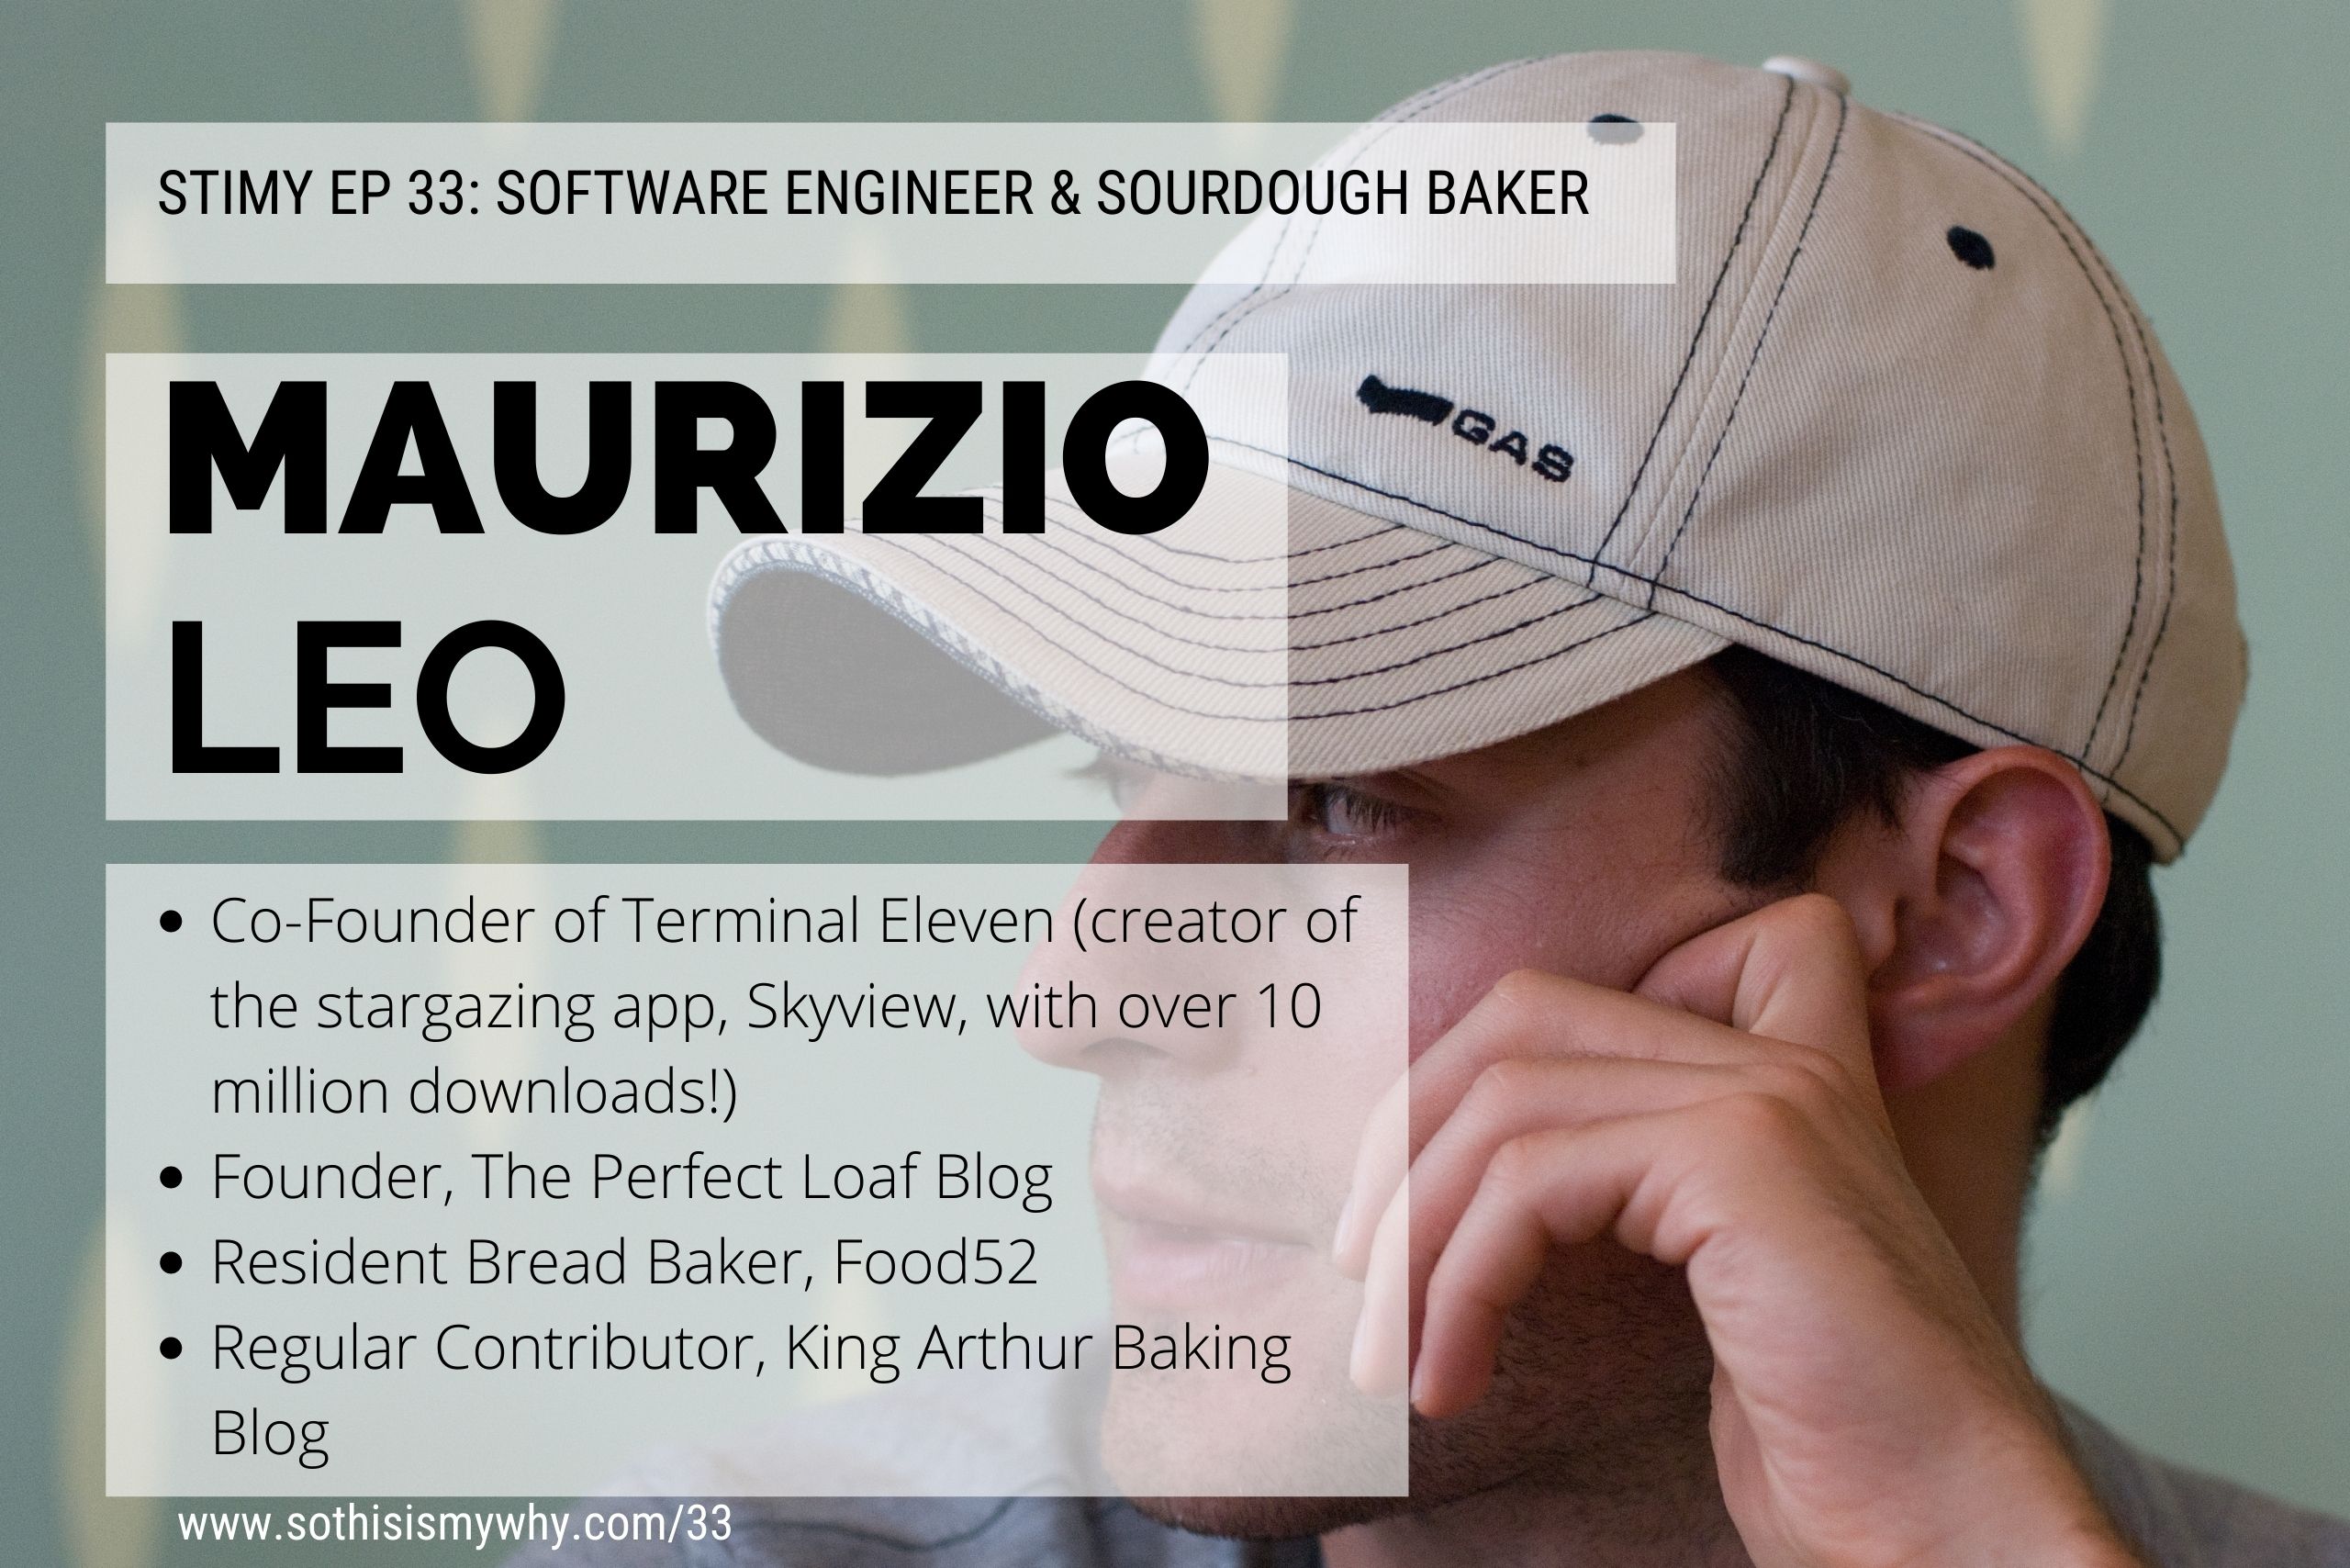 Maurizio Leo - Founder, The Perfect Loaf; Terminal Eleven Skyview mobile app software developer and engineer